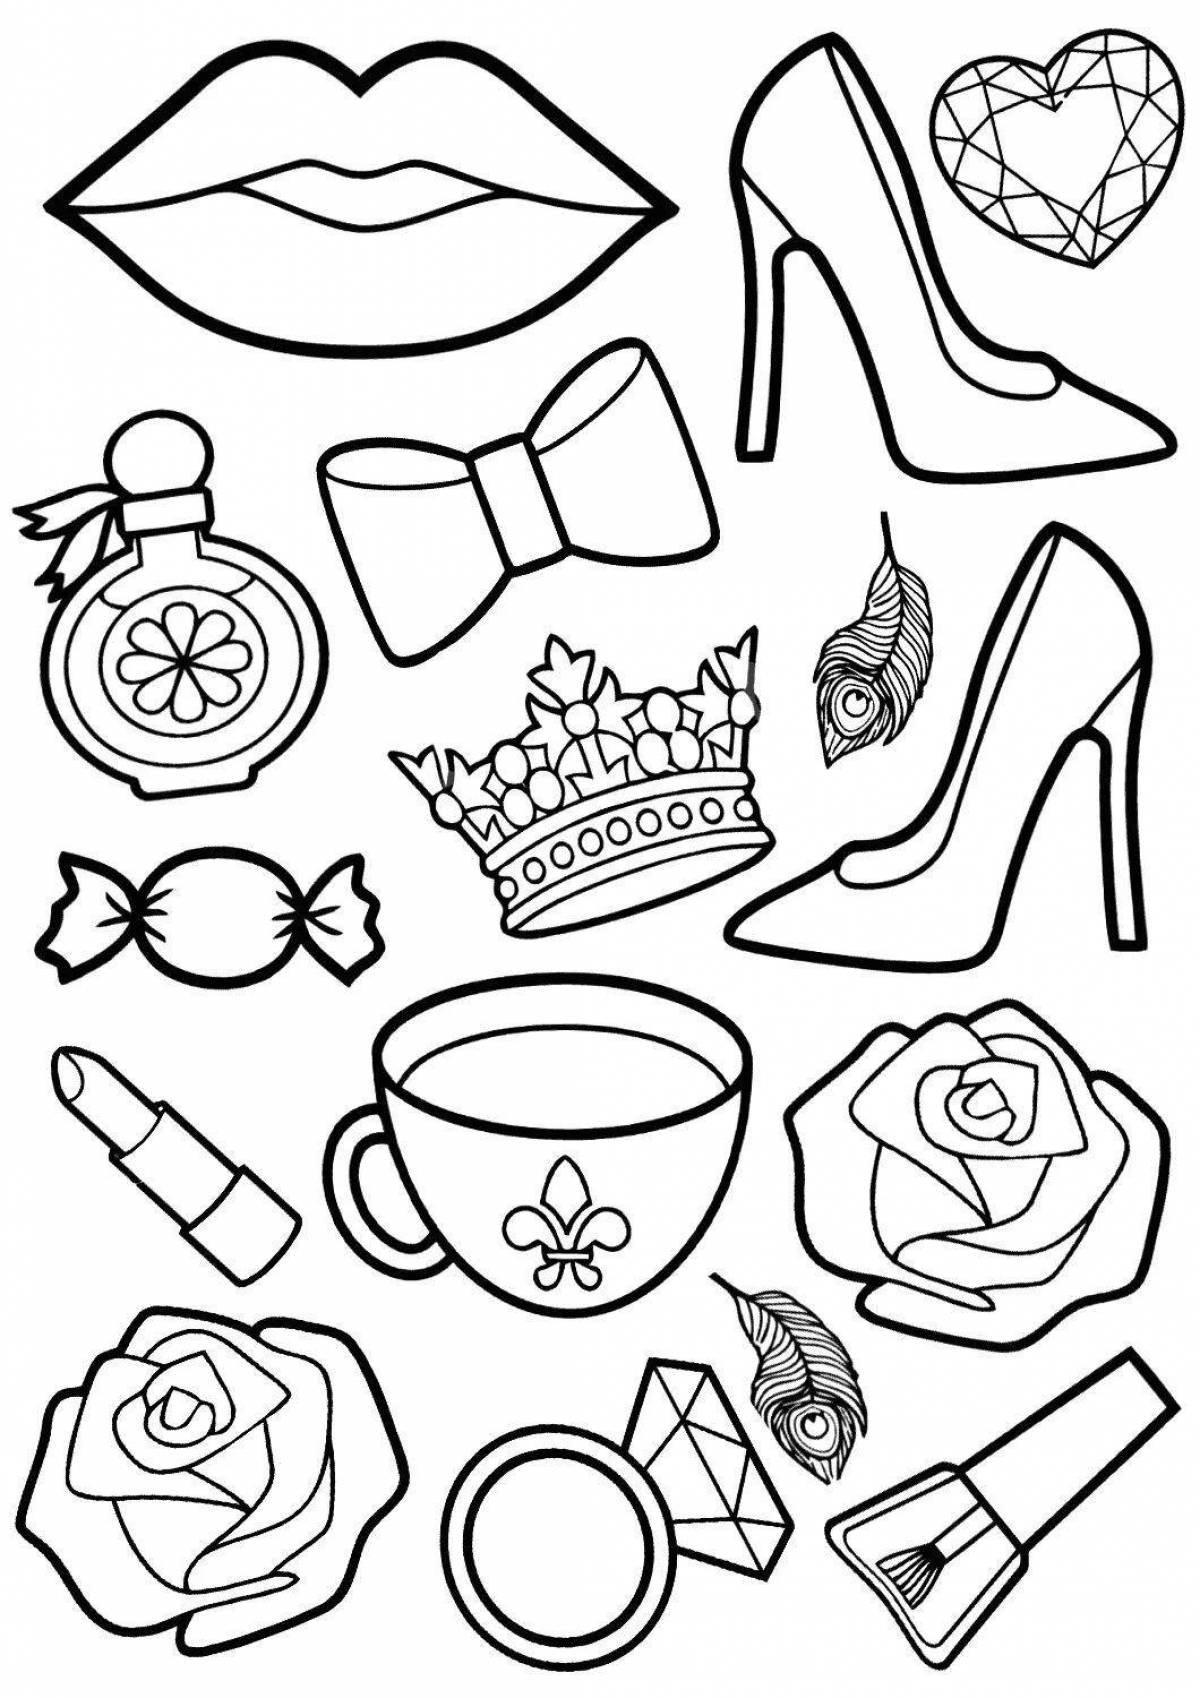 Coloring page nice accessories for girls